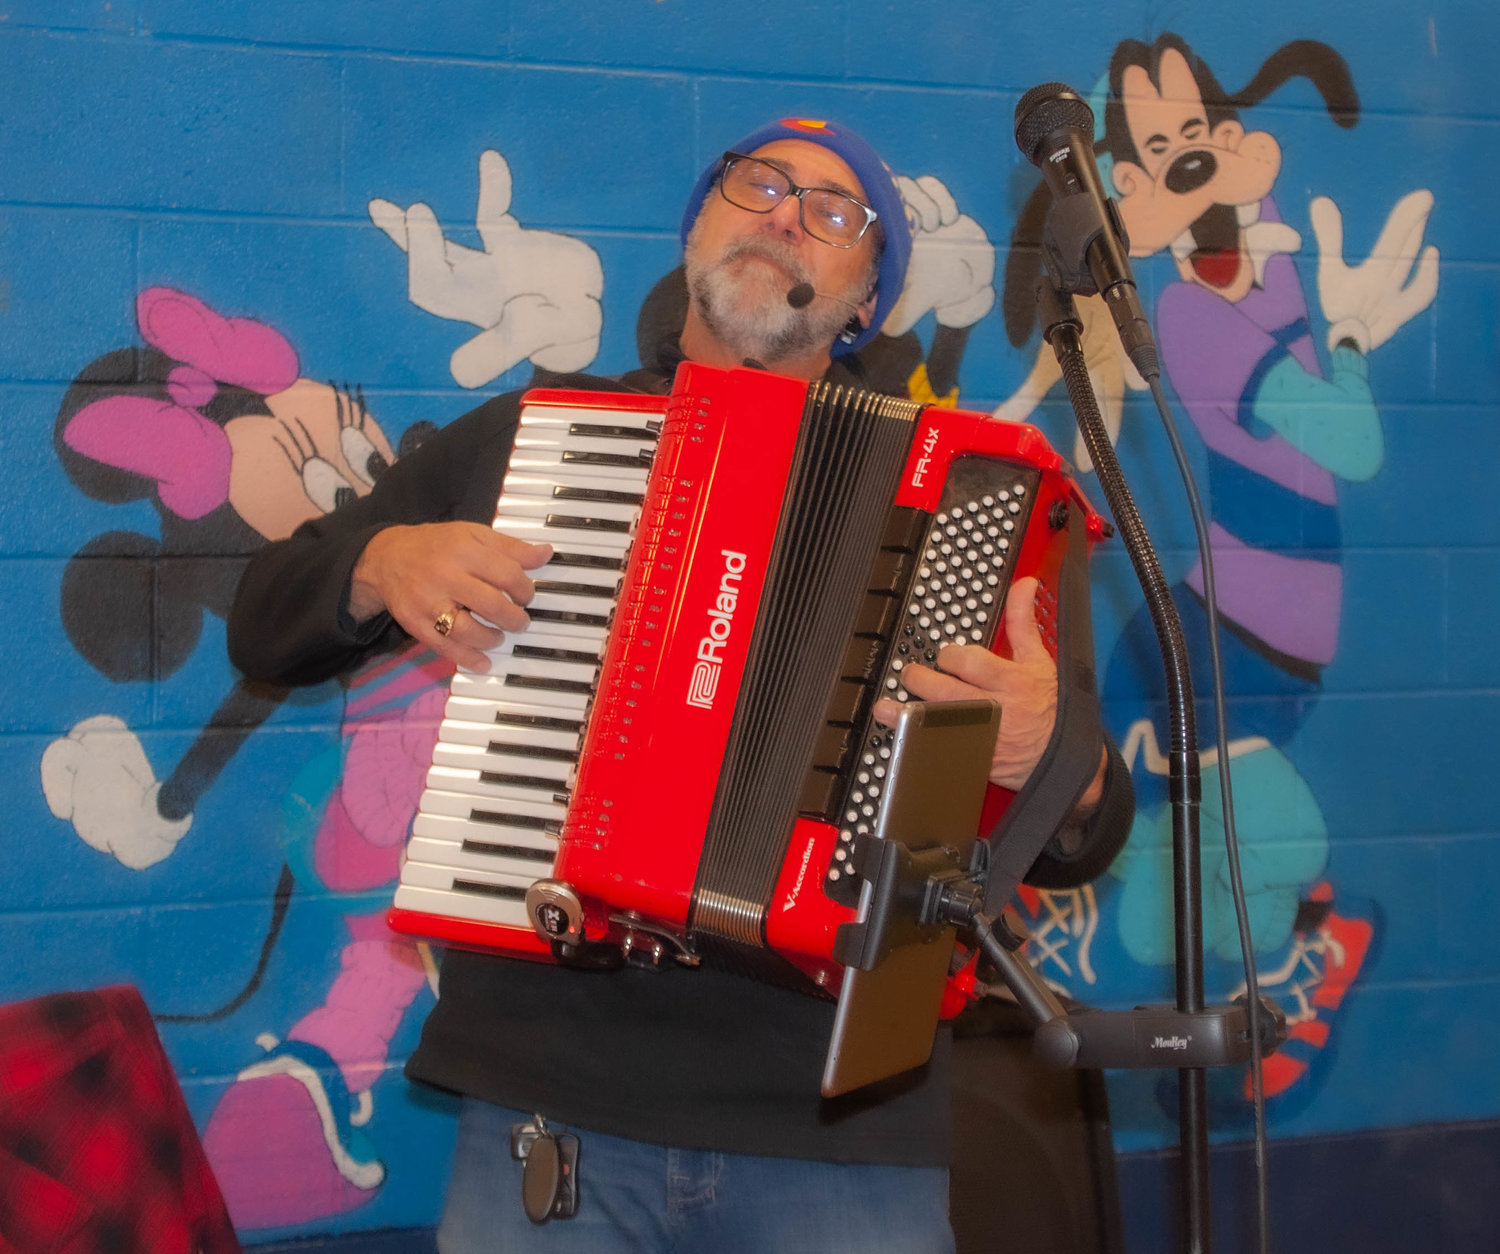 Highly entertaining musician D’Raz performed an accordion version of the Sinatra classic “That’s Life” at the Kauneonga Lake Farmers Market, and I thoroughly dug his swingin’ groove.